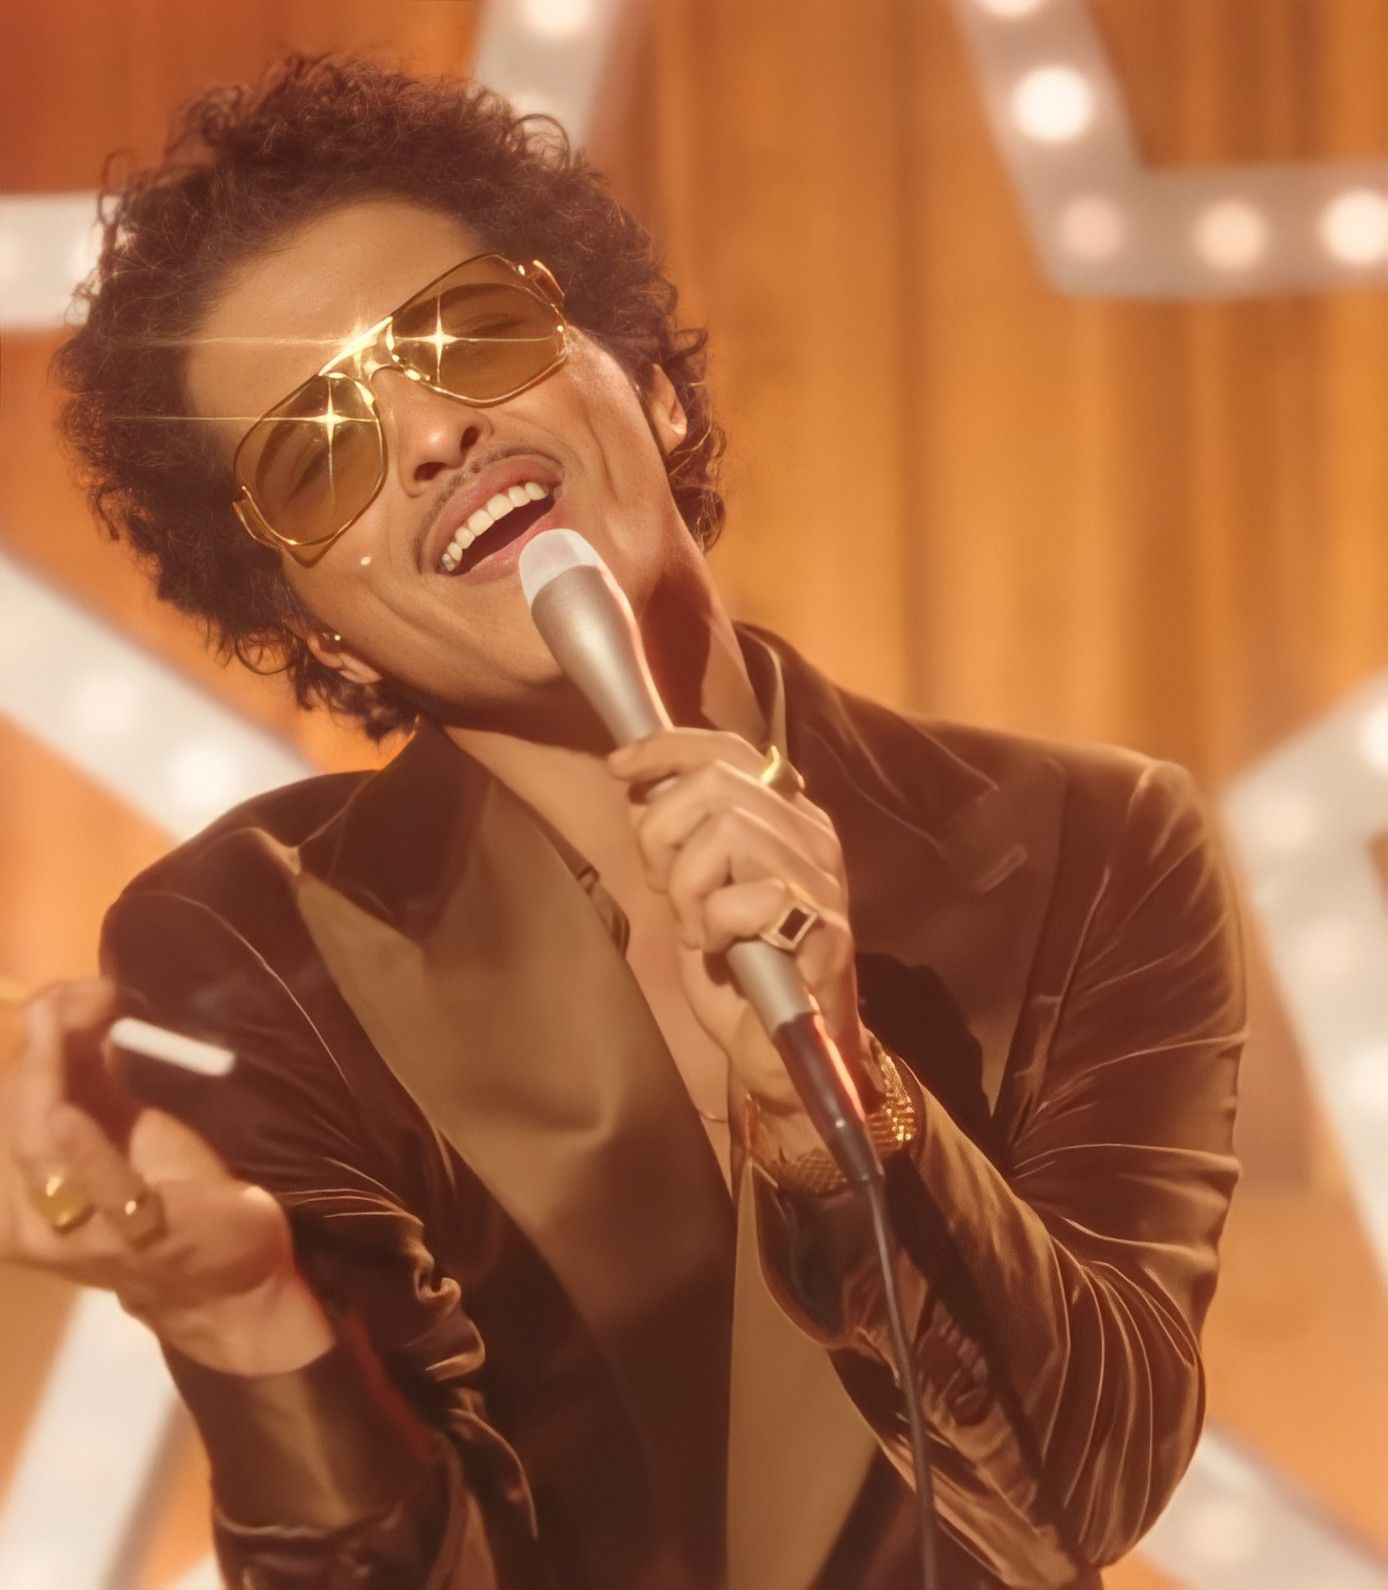 Bruno Mars in a shiny brown suit and sunglasses holding a microphone - Bruno Mars